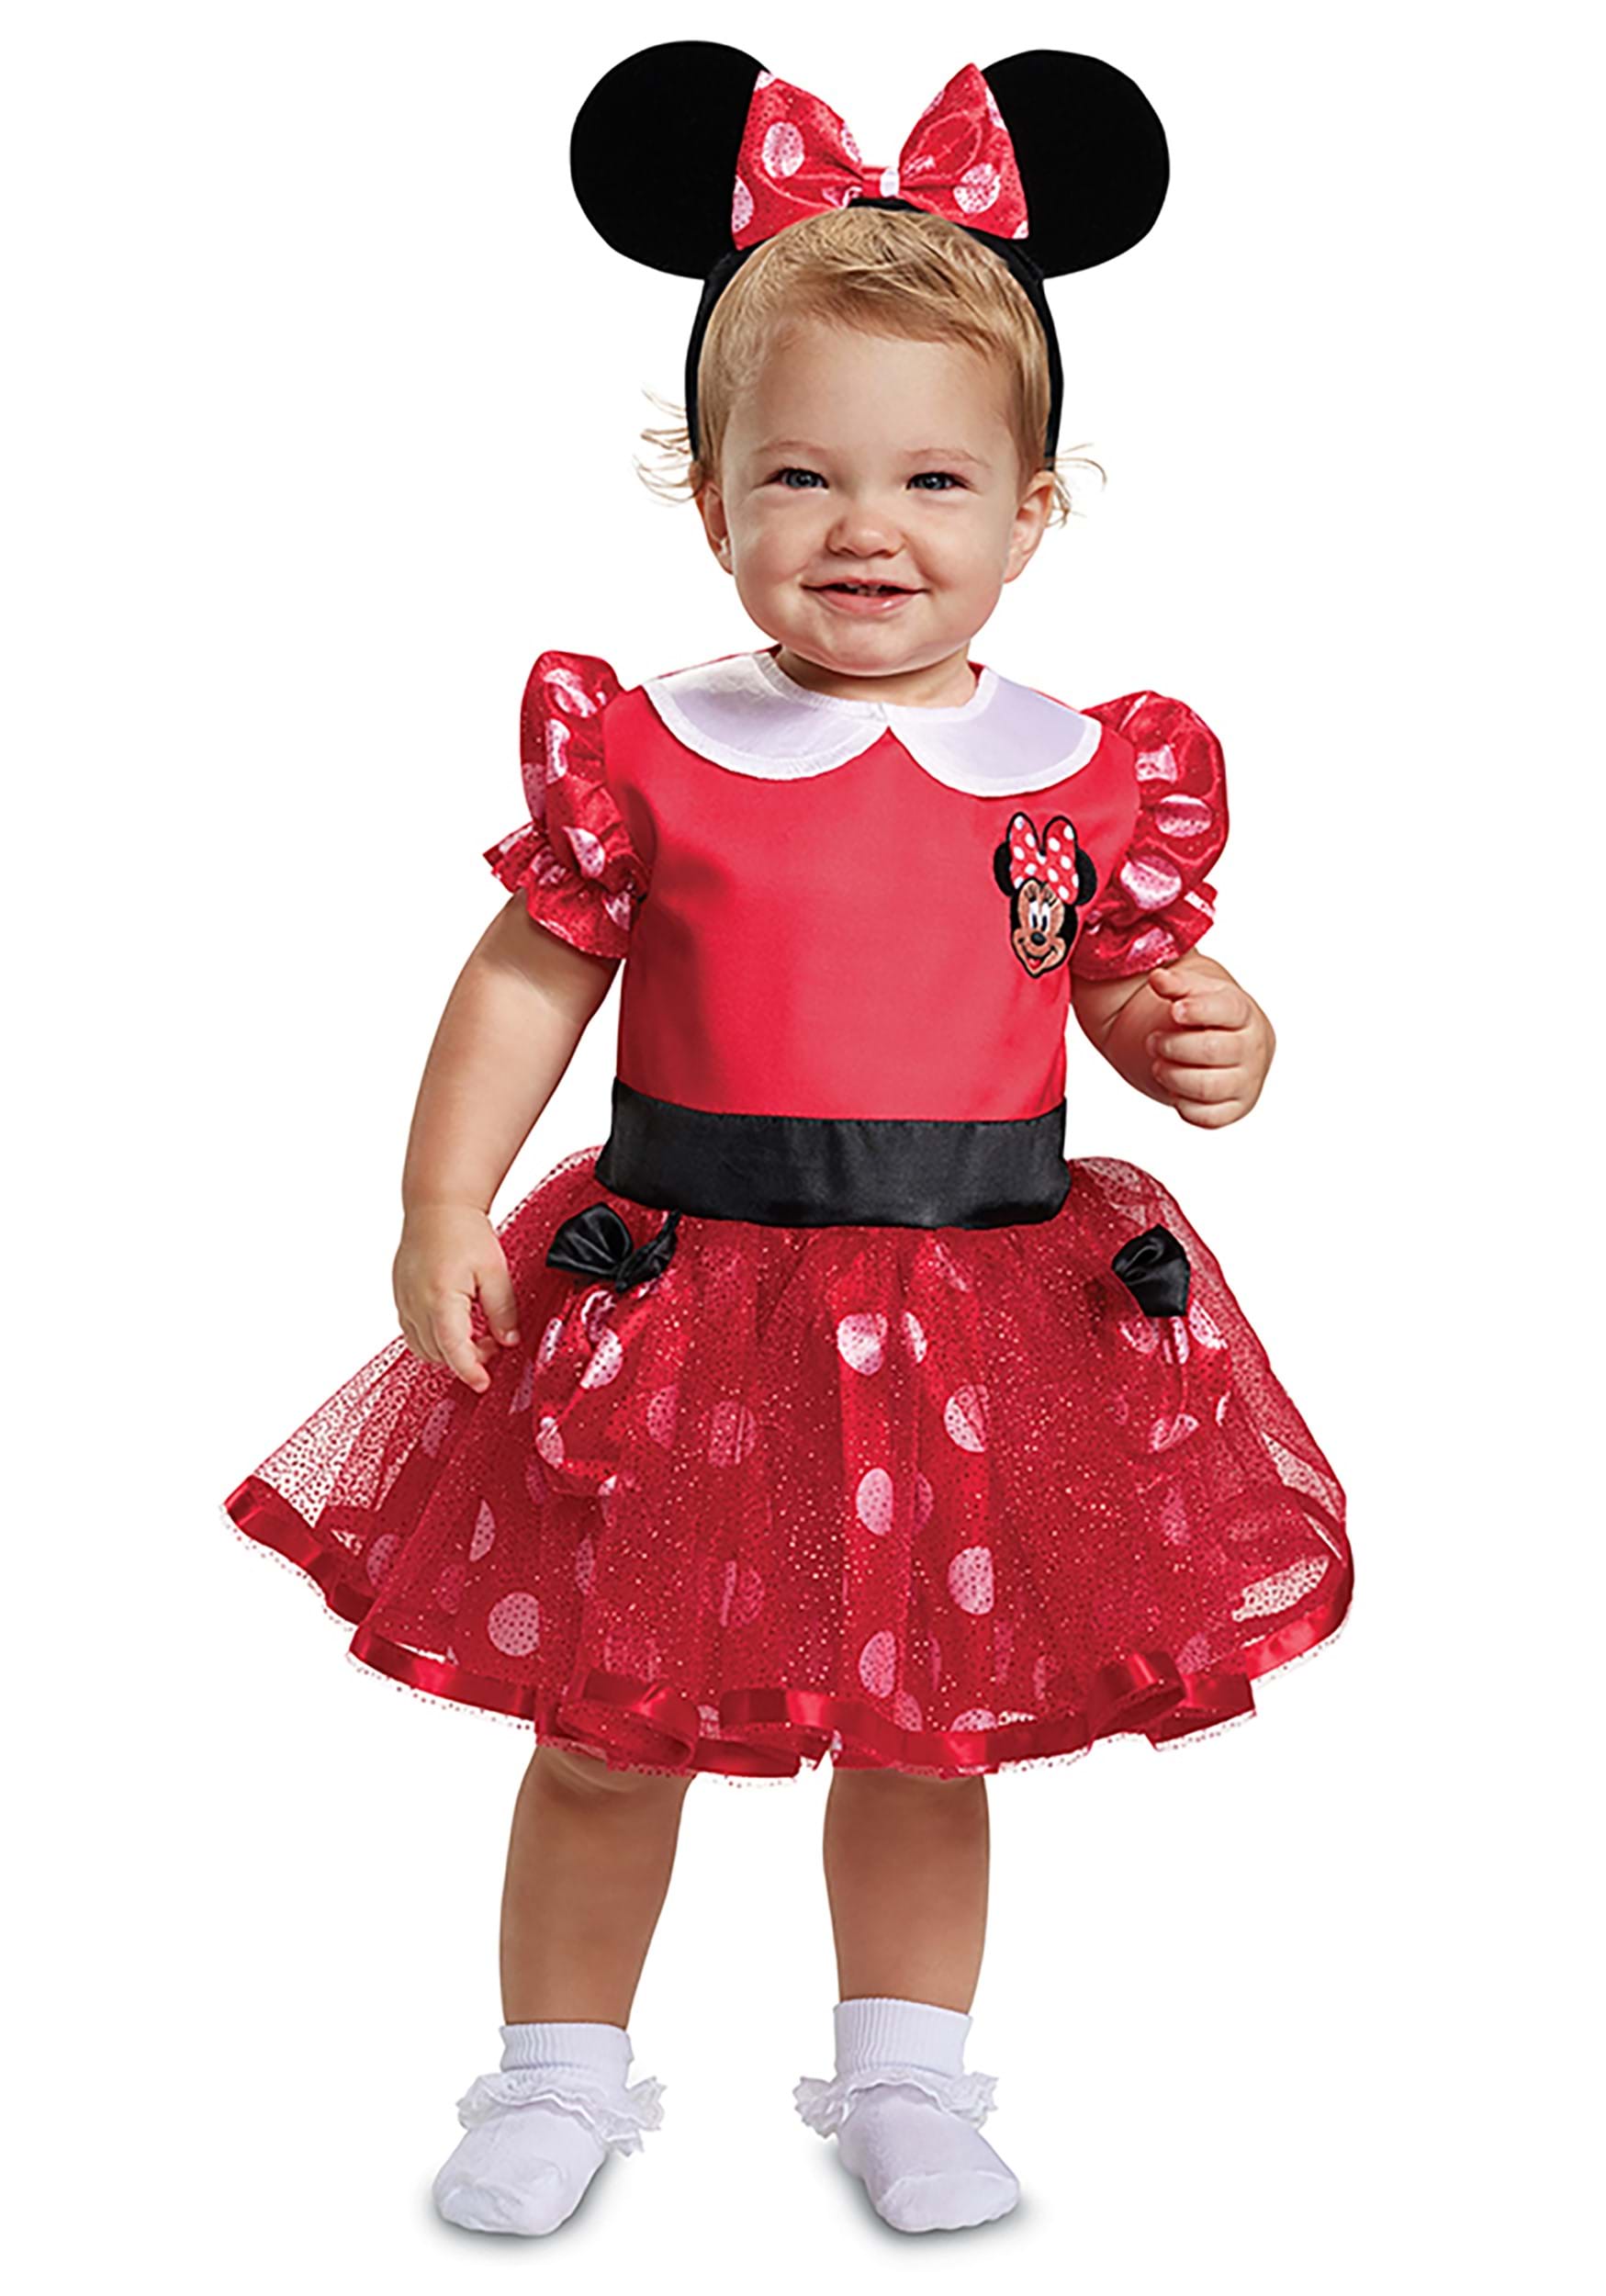 Disney Minnie Mouse Toddler Costume